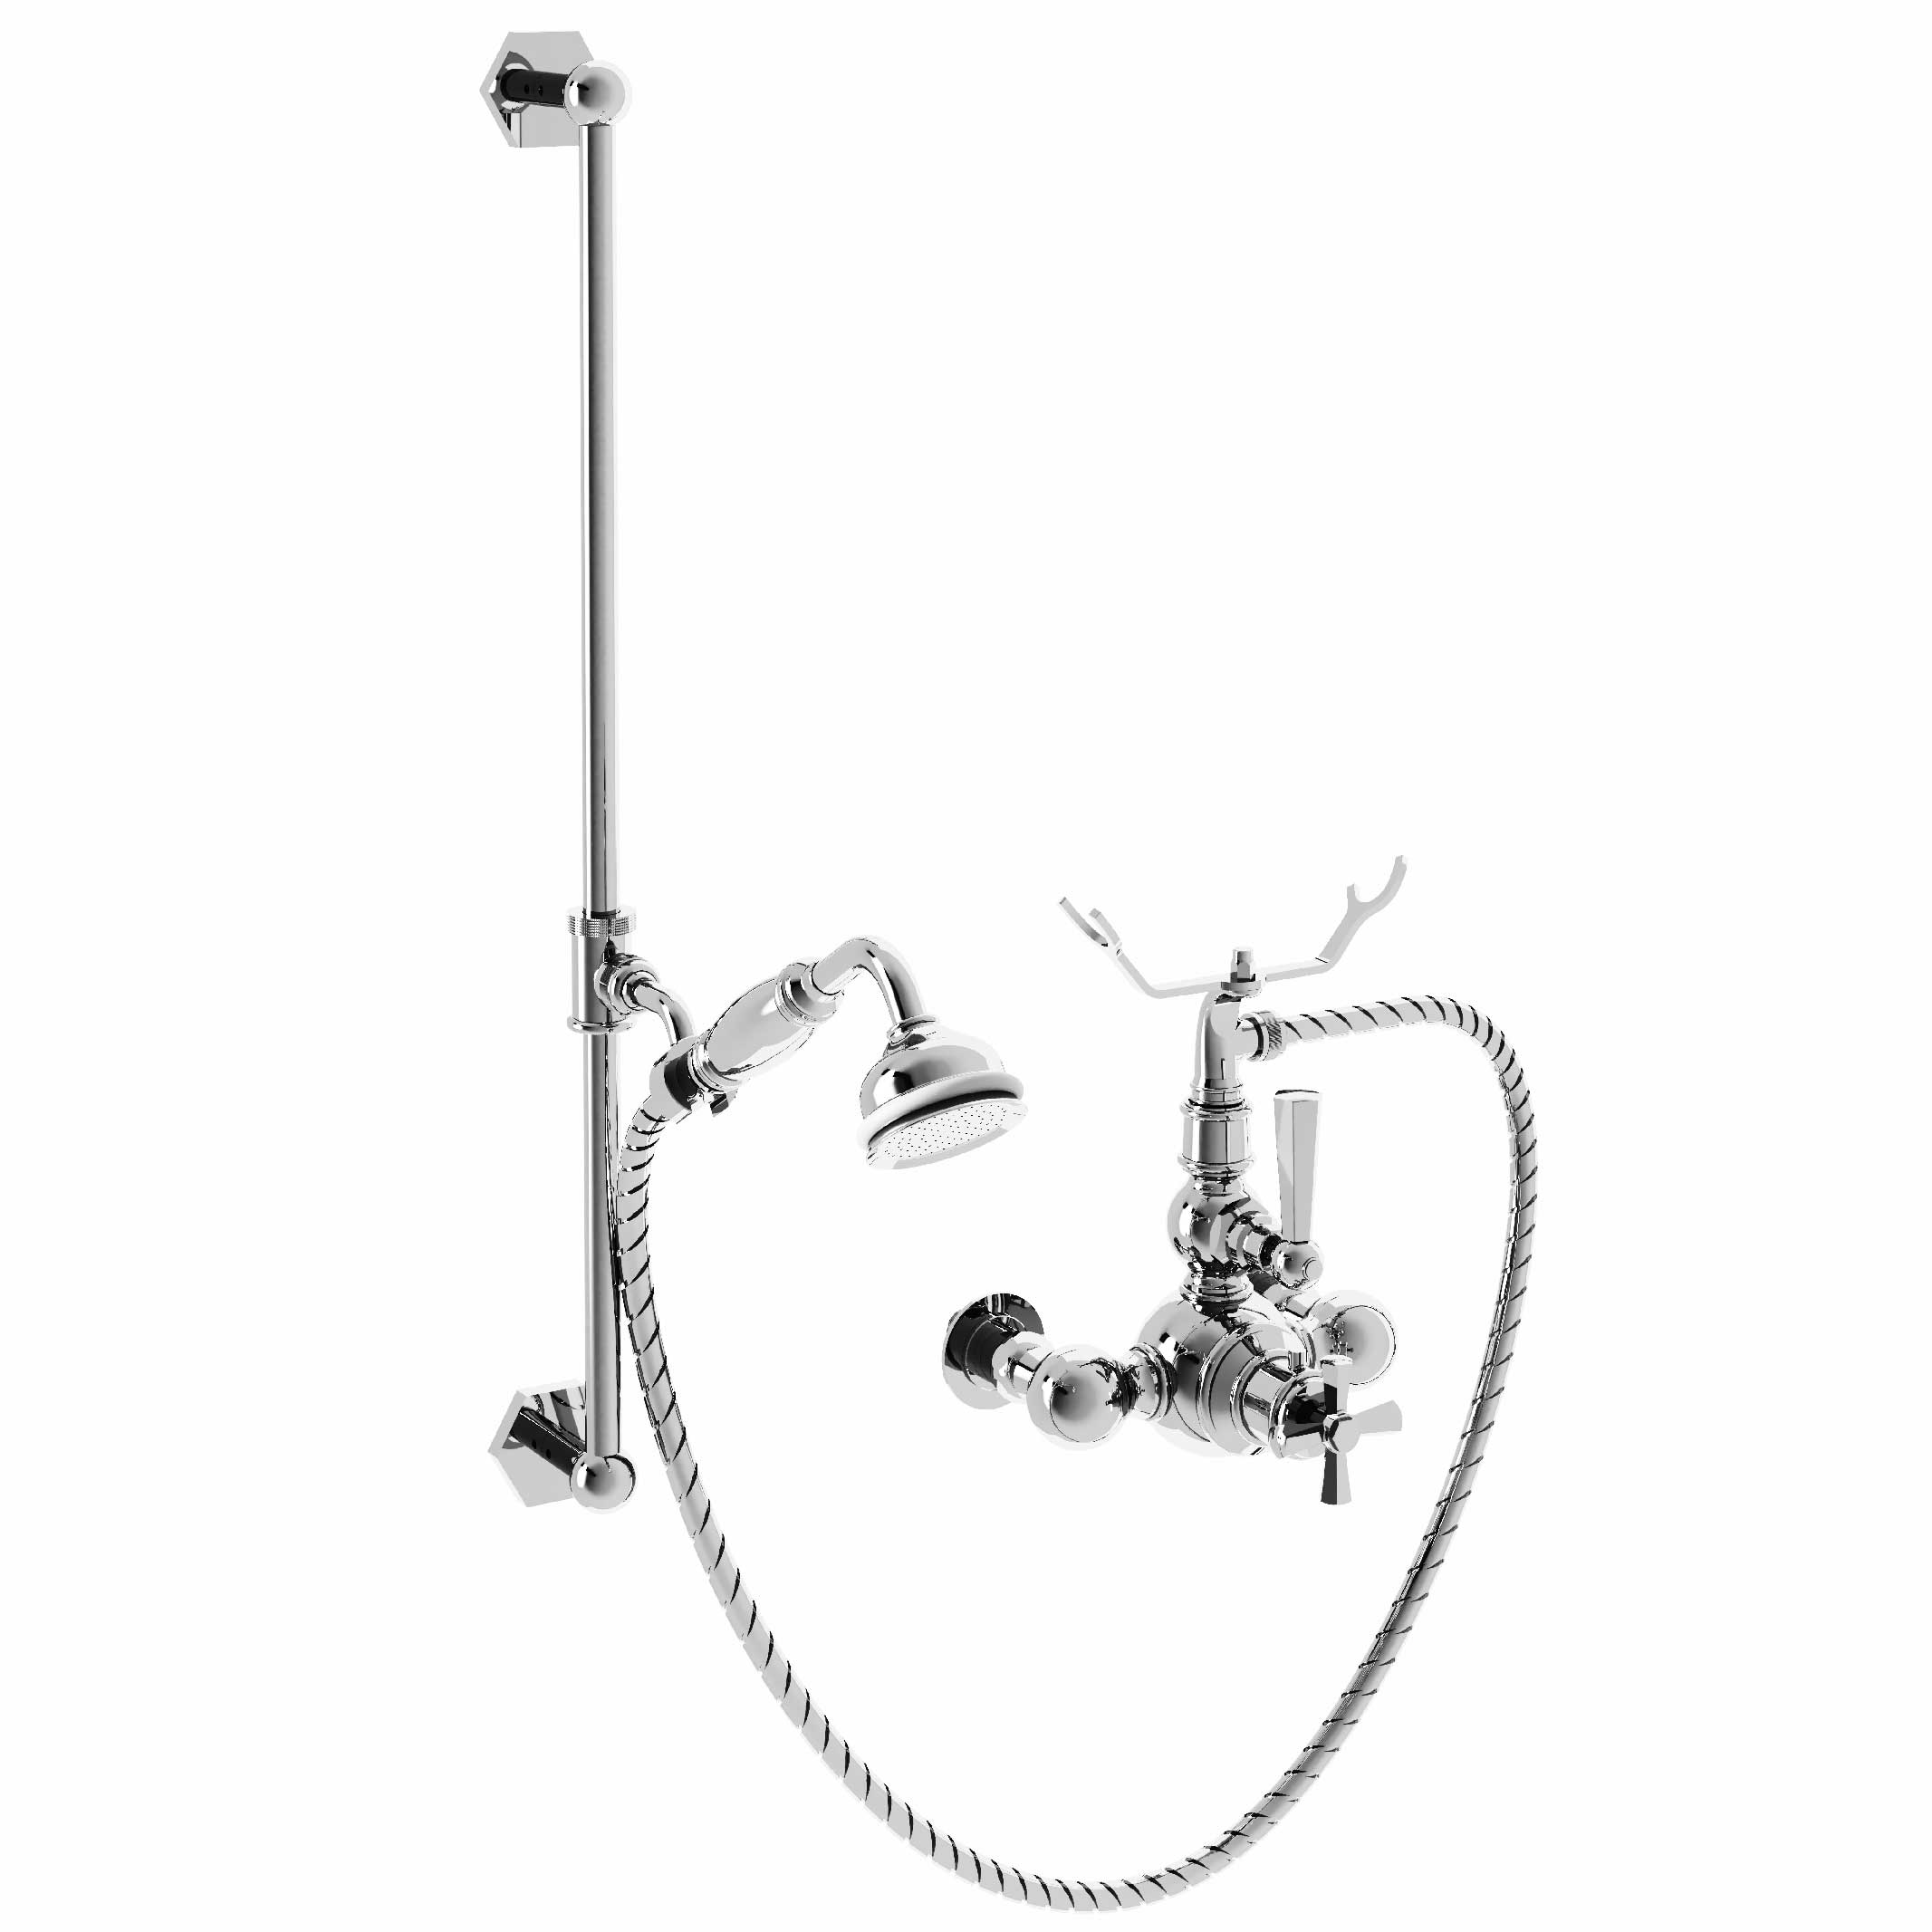 M39-2202T Mitigeur thermo. douche, coulidouche